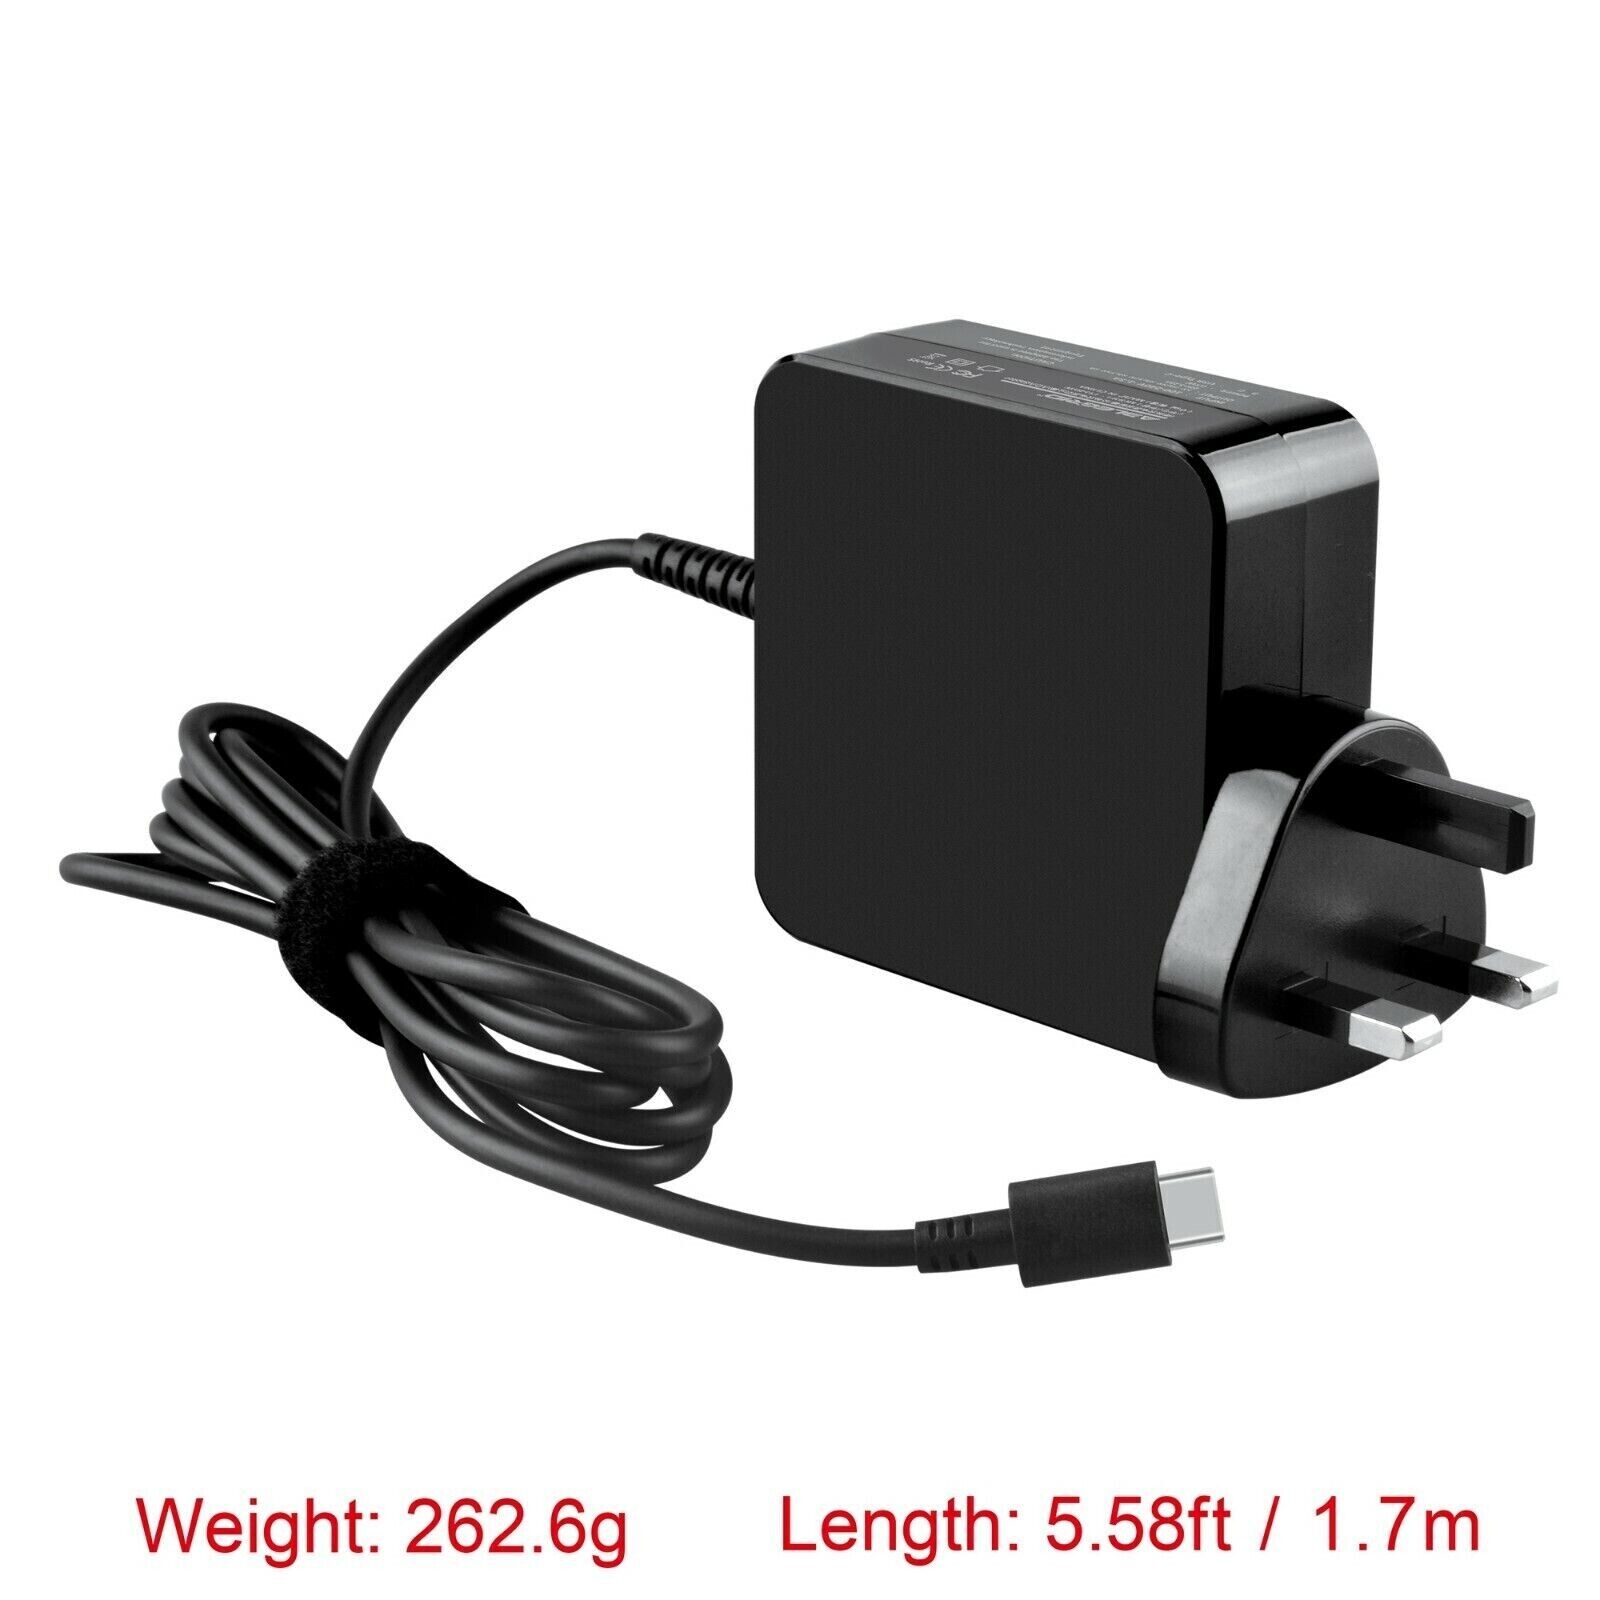 65W USB-C AC Adapter Charger for NOCO Booster X GBX155 GB75 Power Supply Cord Type Power Adapter Voltage 20 V Colour Bl